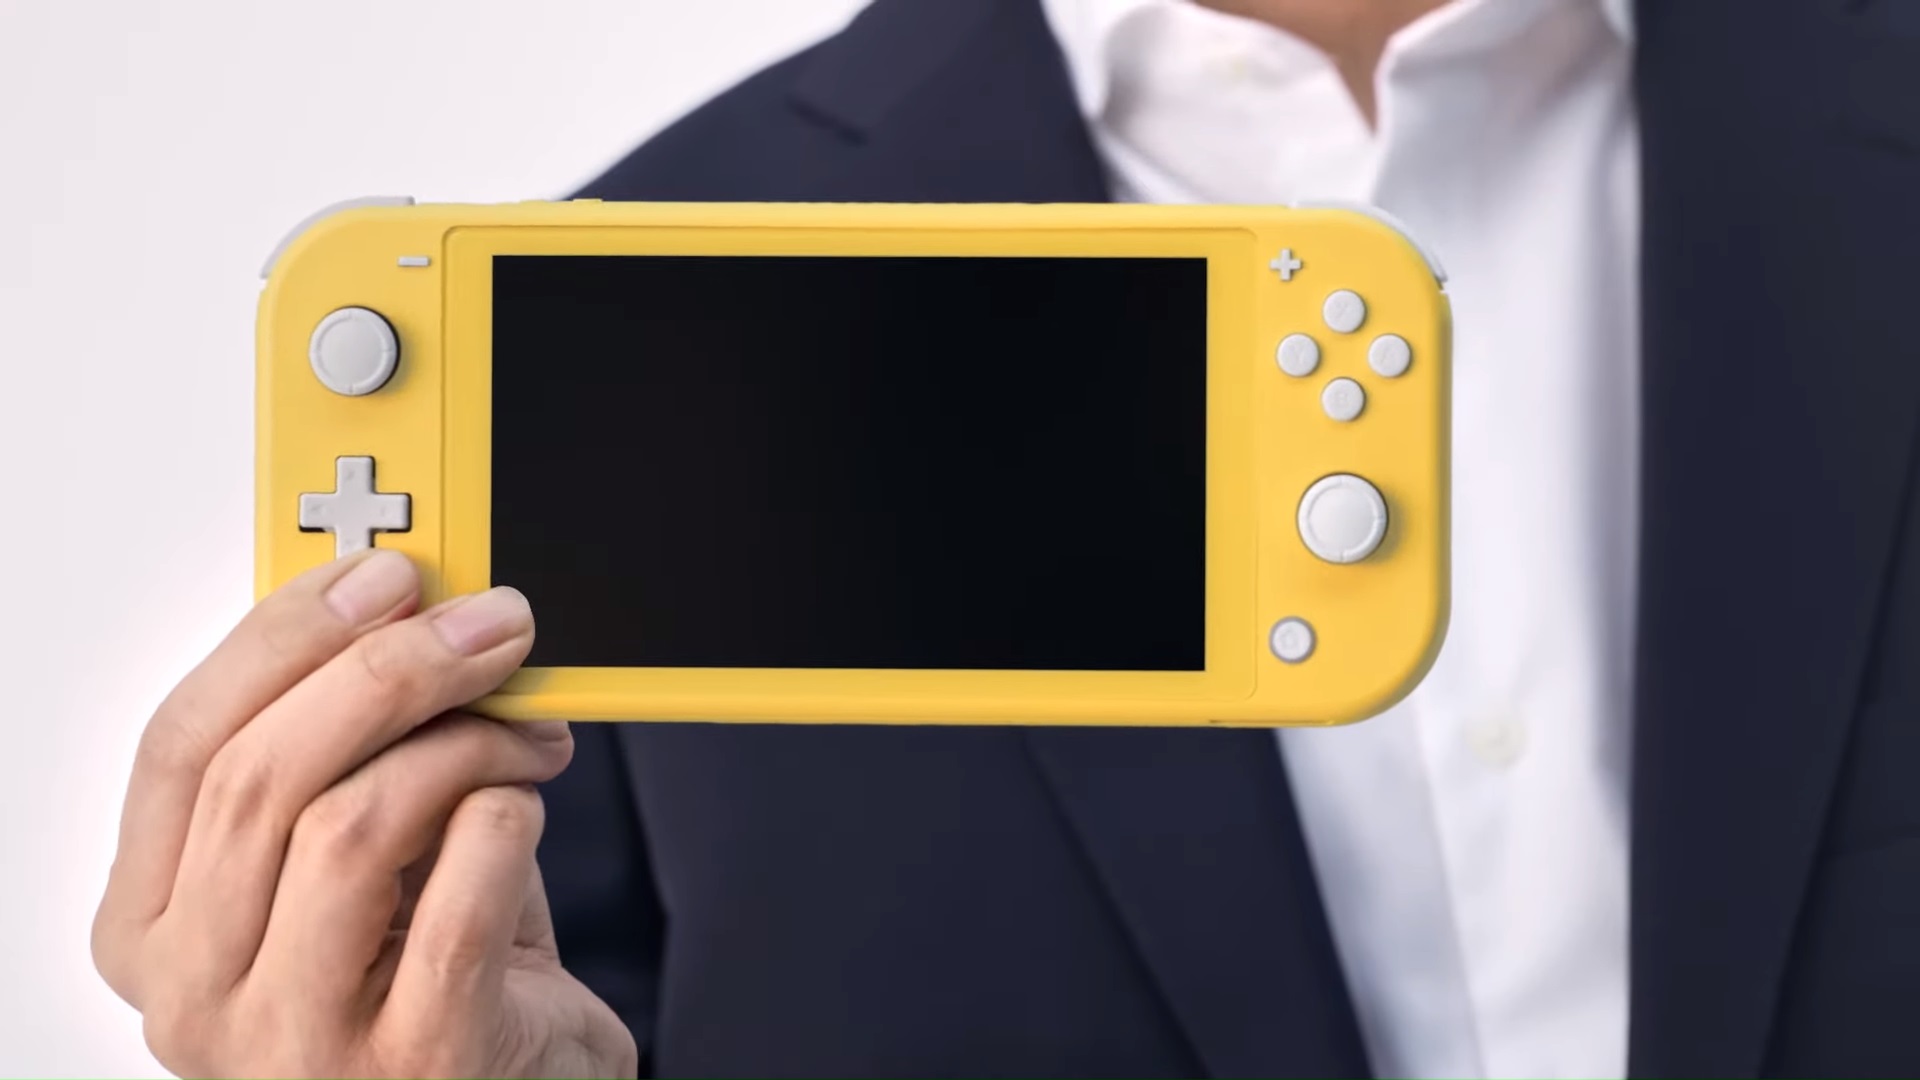 when's the new nintendo switch coming out